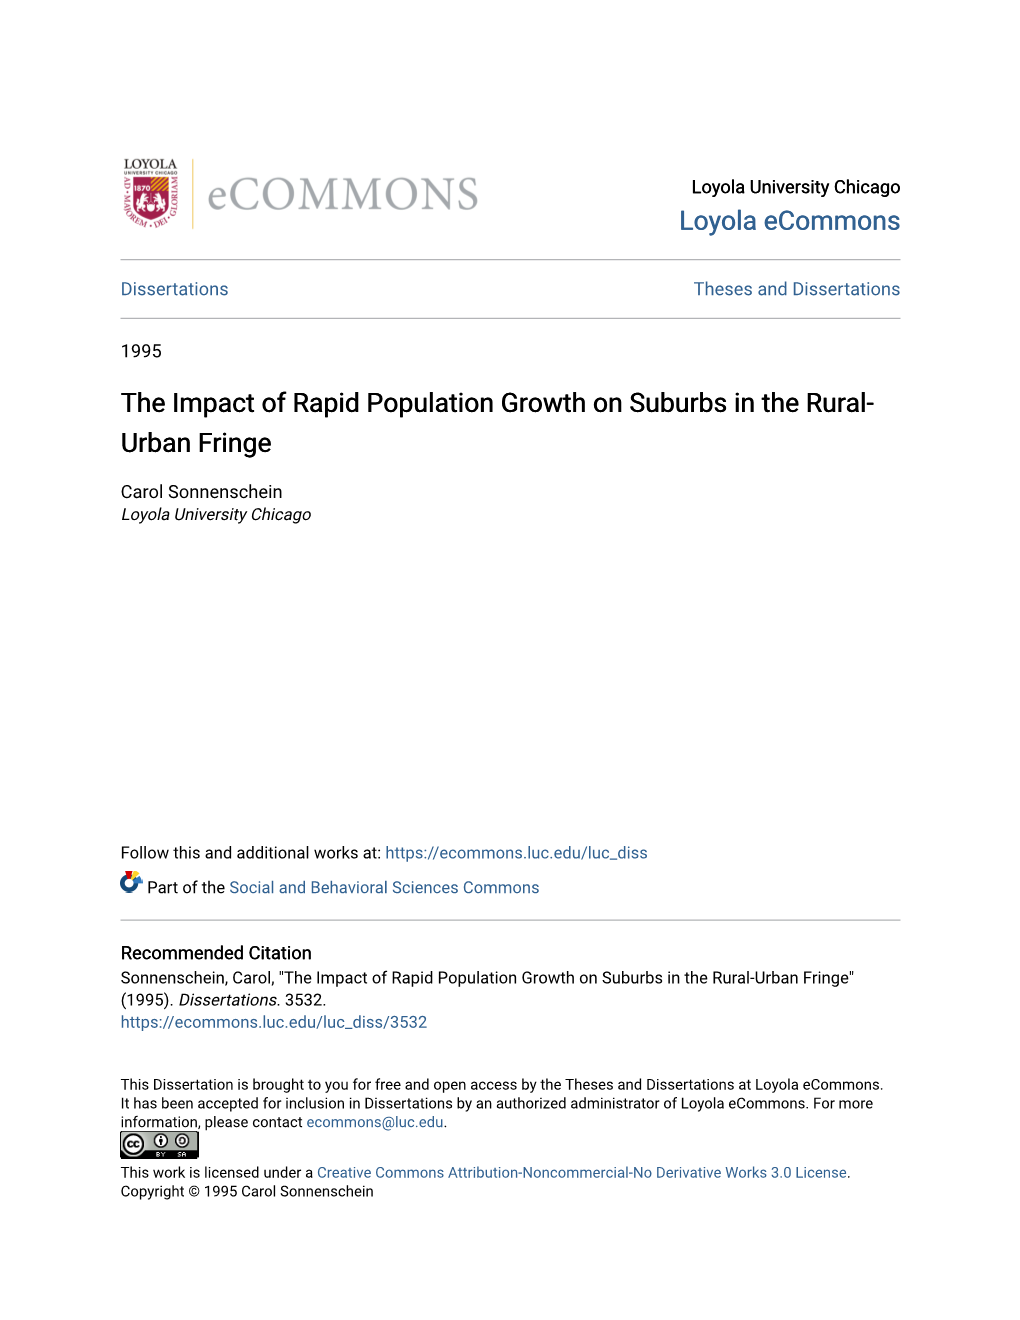 The Impact of Rapid Population Growth on Suburbs in the Rural- Urban Fringe